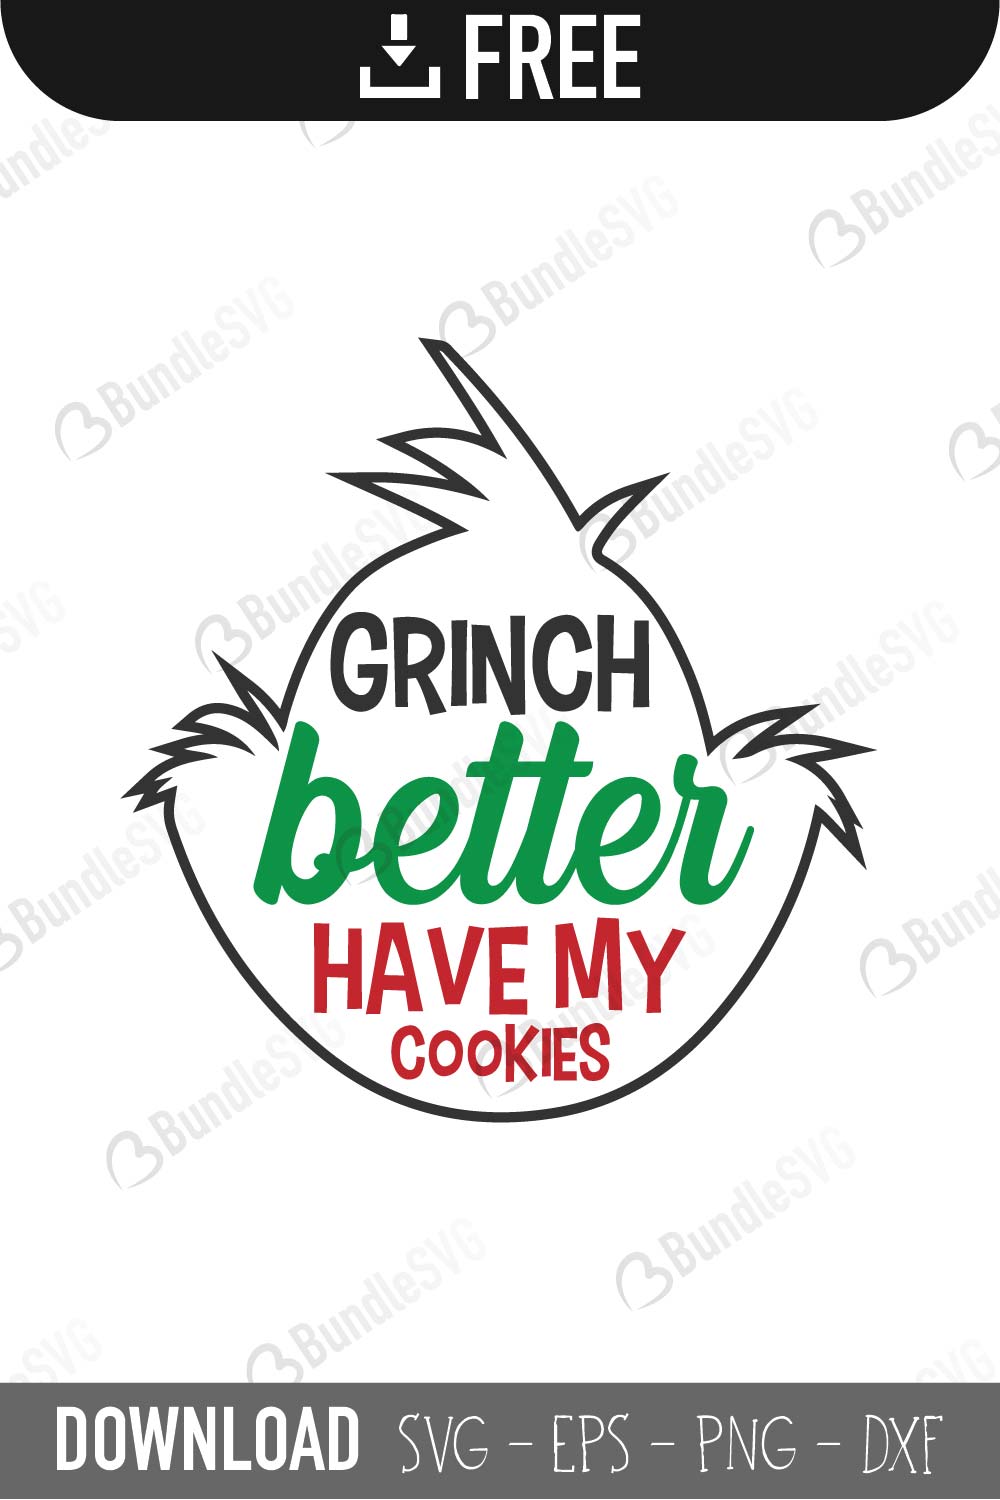 Download 28+ Free Svg Grinch PNG Free SVG files | Silhouette and ...